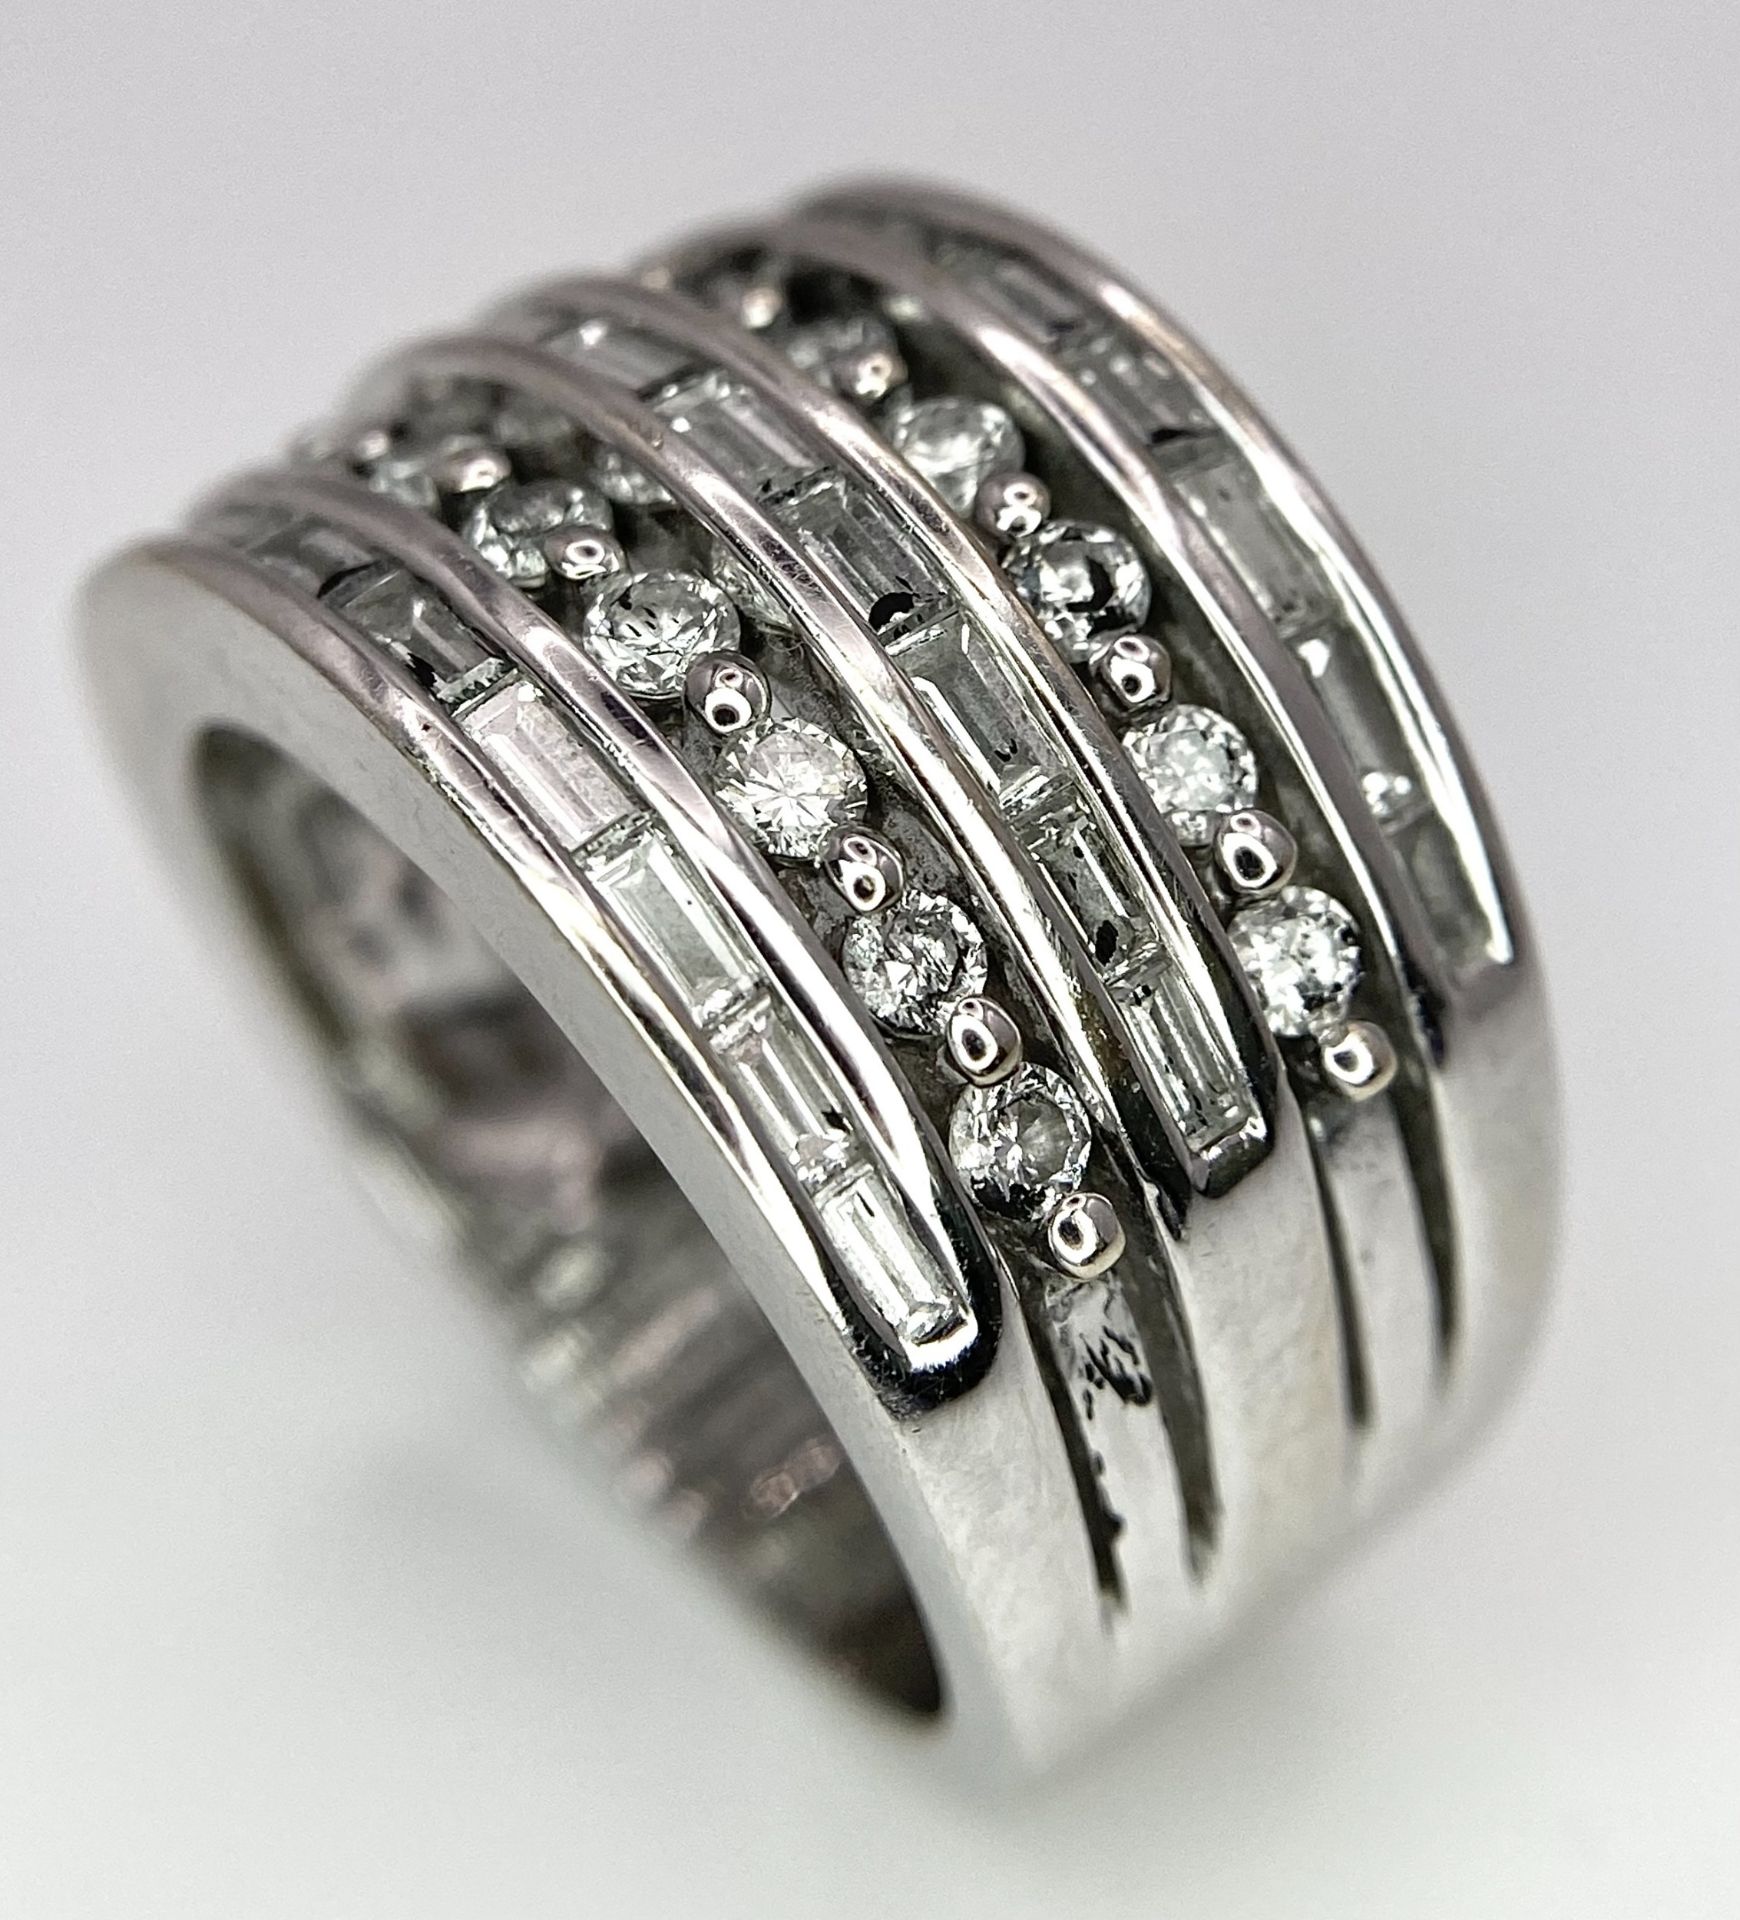 AN 18K WHITE GOLD 5 ROW DIAMOND RING. MIXTURE OF ROUND BRILLIANT CUTS AND BAGUETTE CUT DIAMONDS. - Image 4 of 9